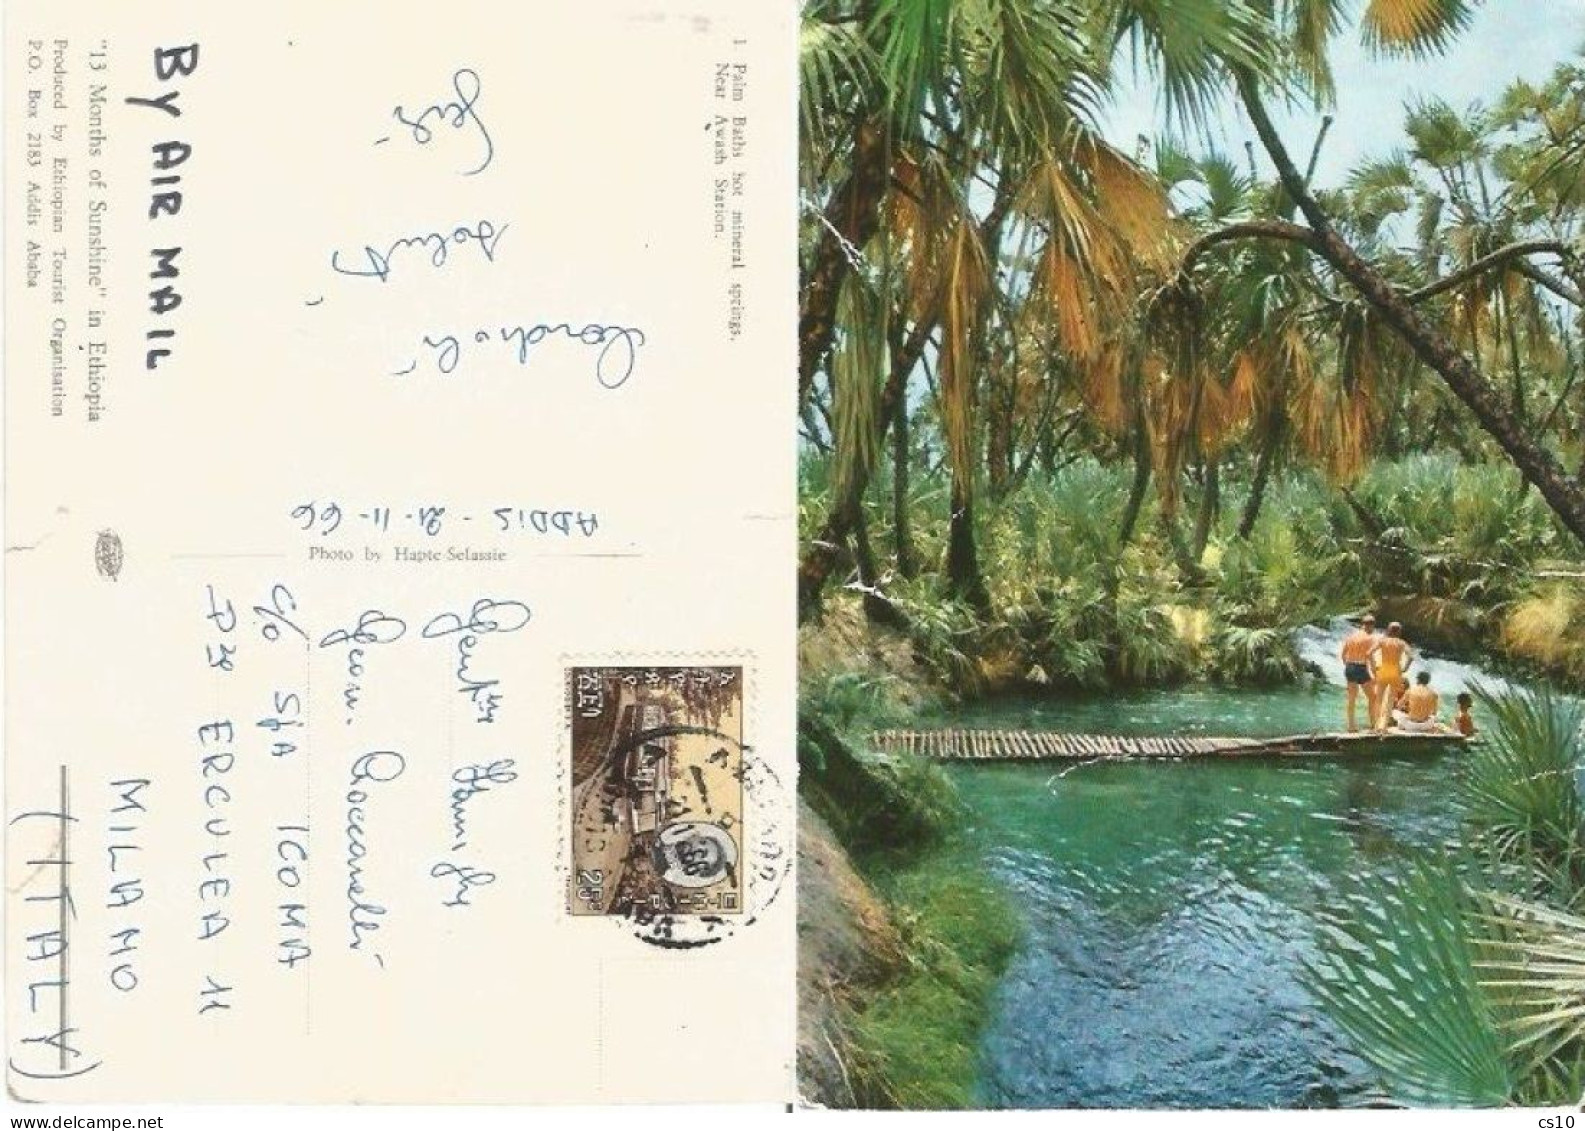 Ethiopia Palm Baths Hot Mineral Springs Awash Station Airmail Pcard 21nov1966 X Italy With 1 Stamp - Ethiopia